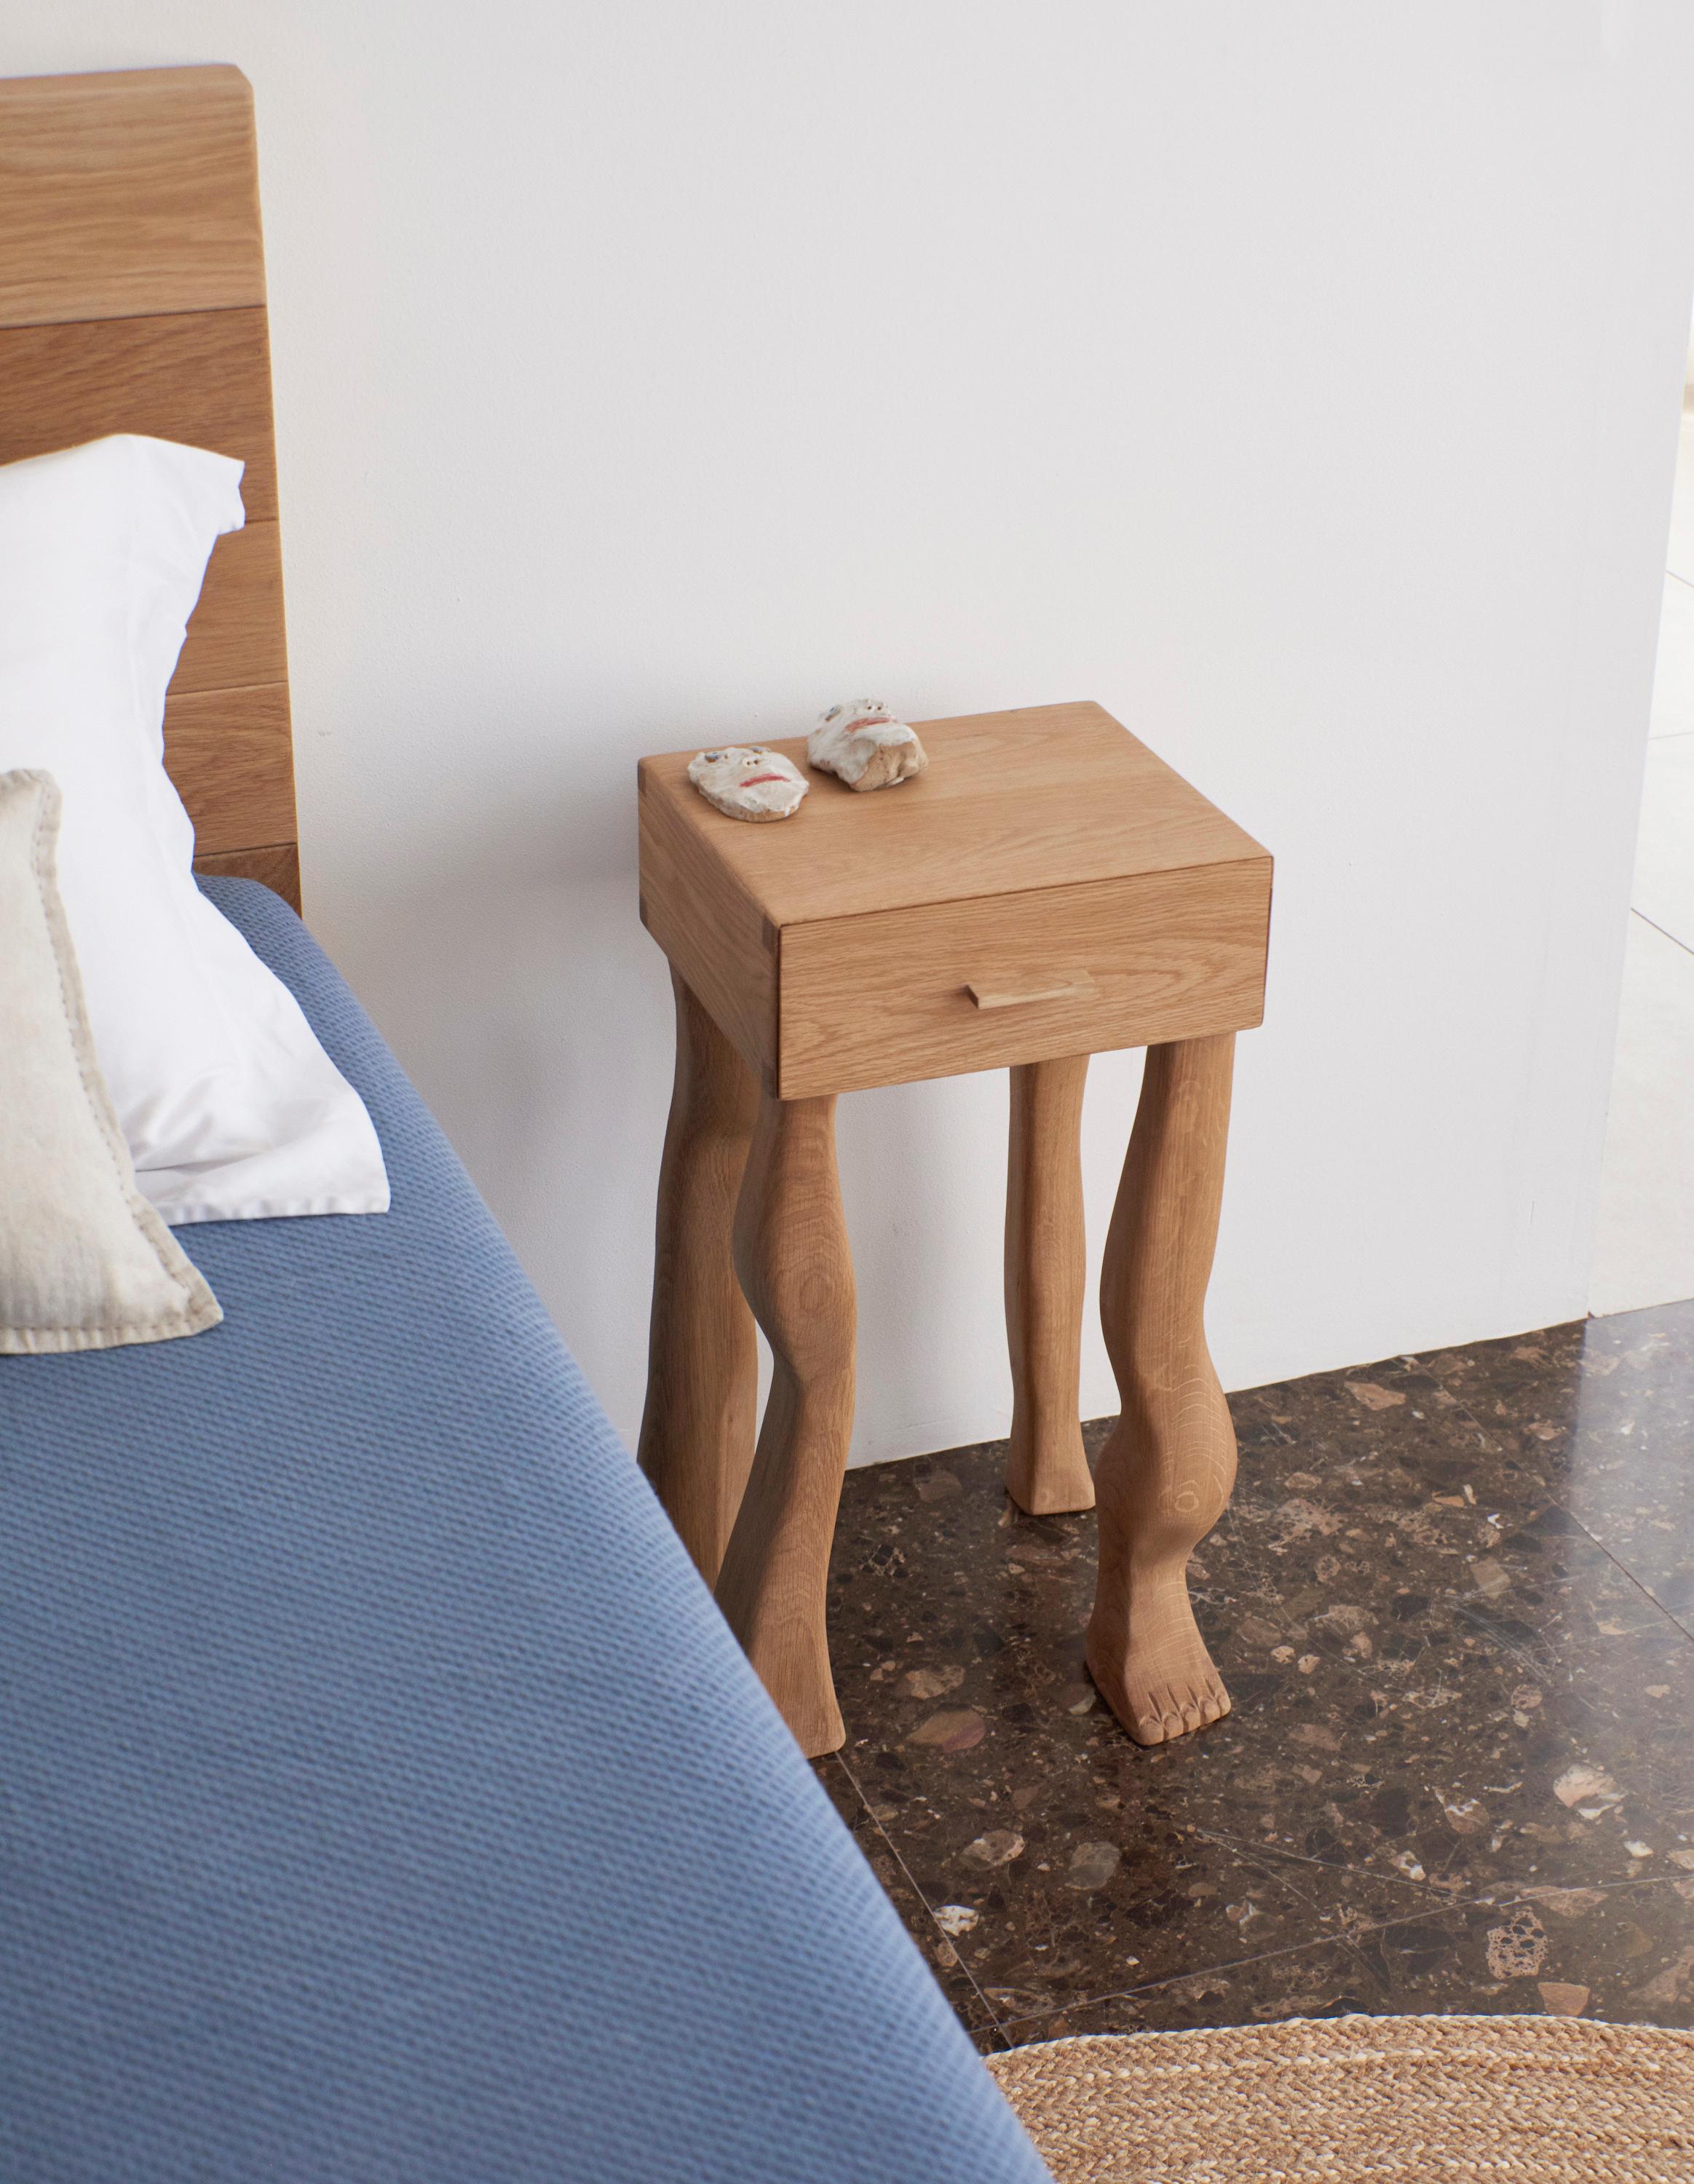 Foot Side Table
Designed by Project 213A in 2023 as part of the Brand's signature Foot Collection.

The 